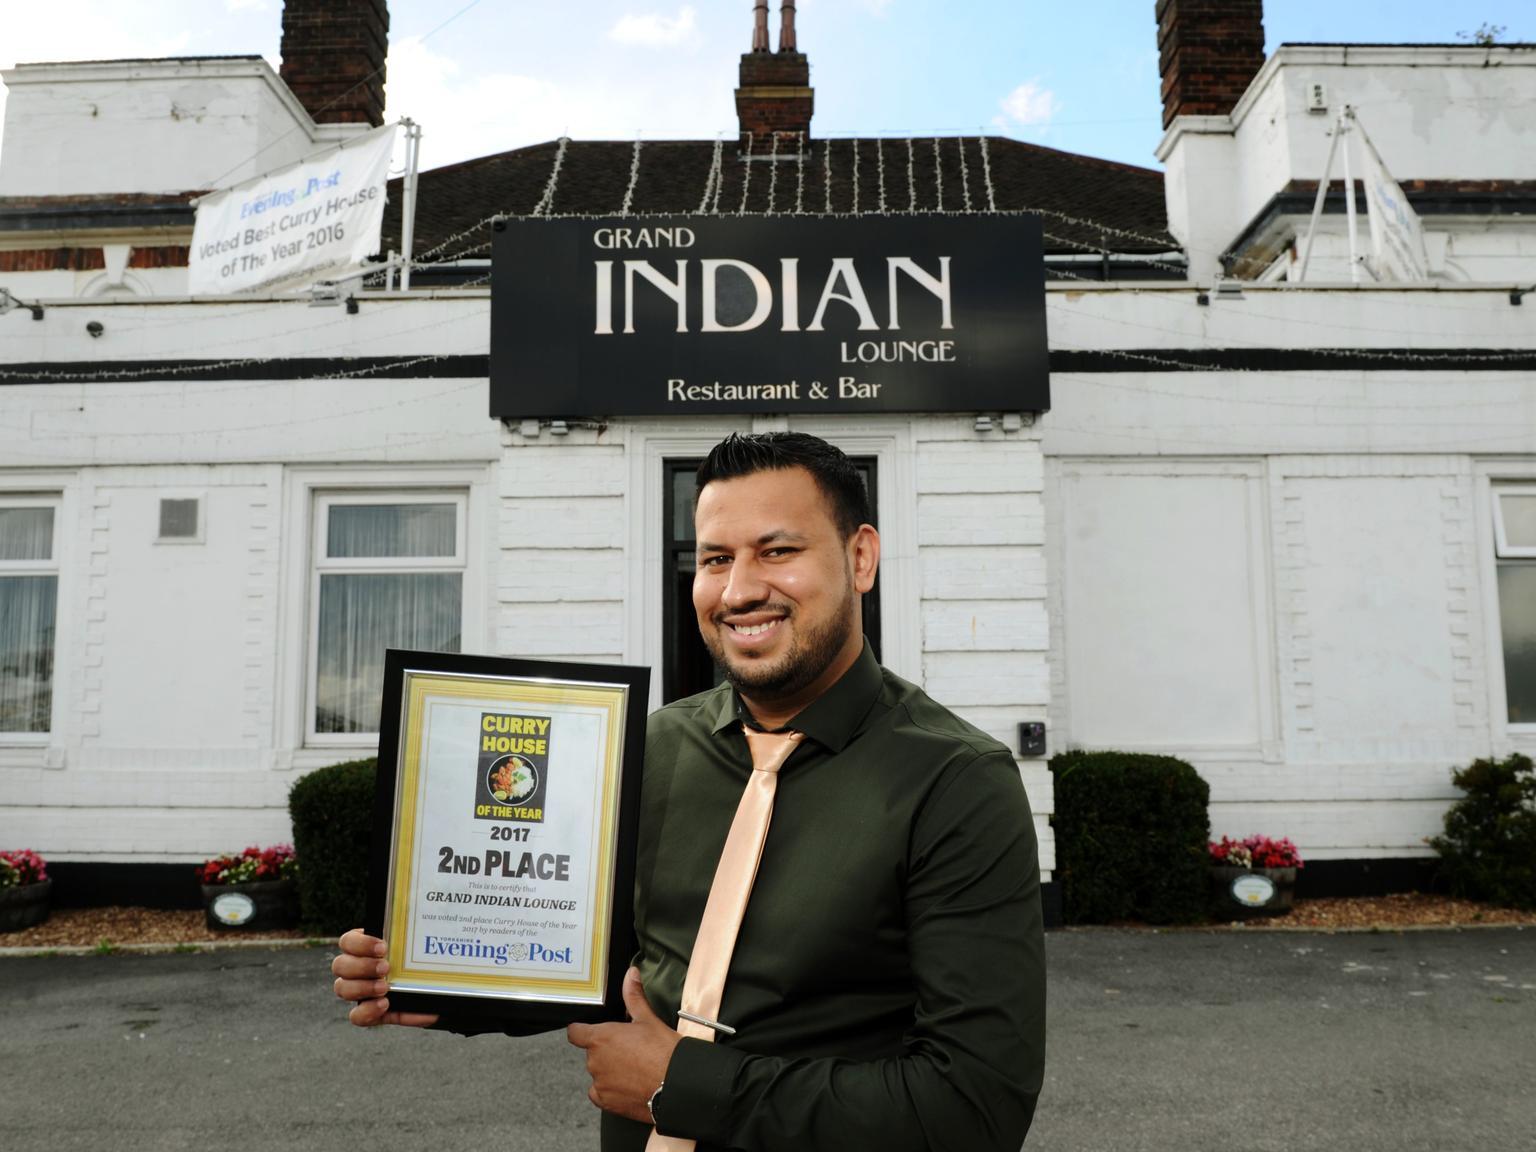 Winners of the YEP's Curry House of the Year in 2016, and second-place in 2017, TripAdvisor reviewers agree that this curry house is one of the best in Leeds.